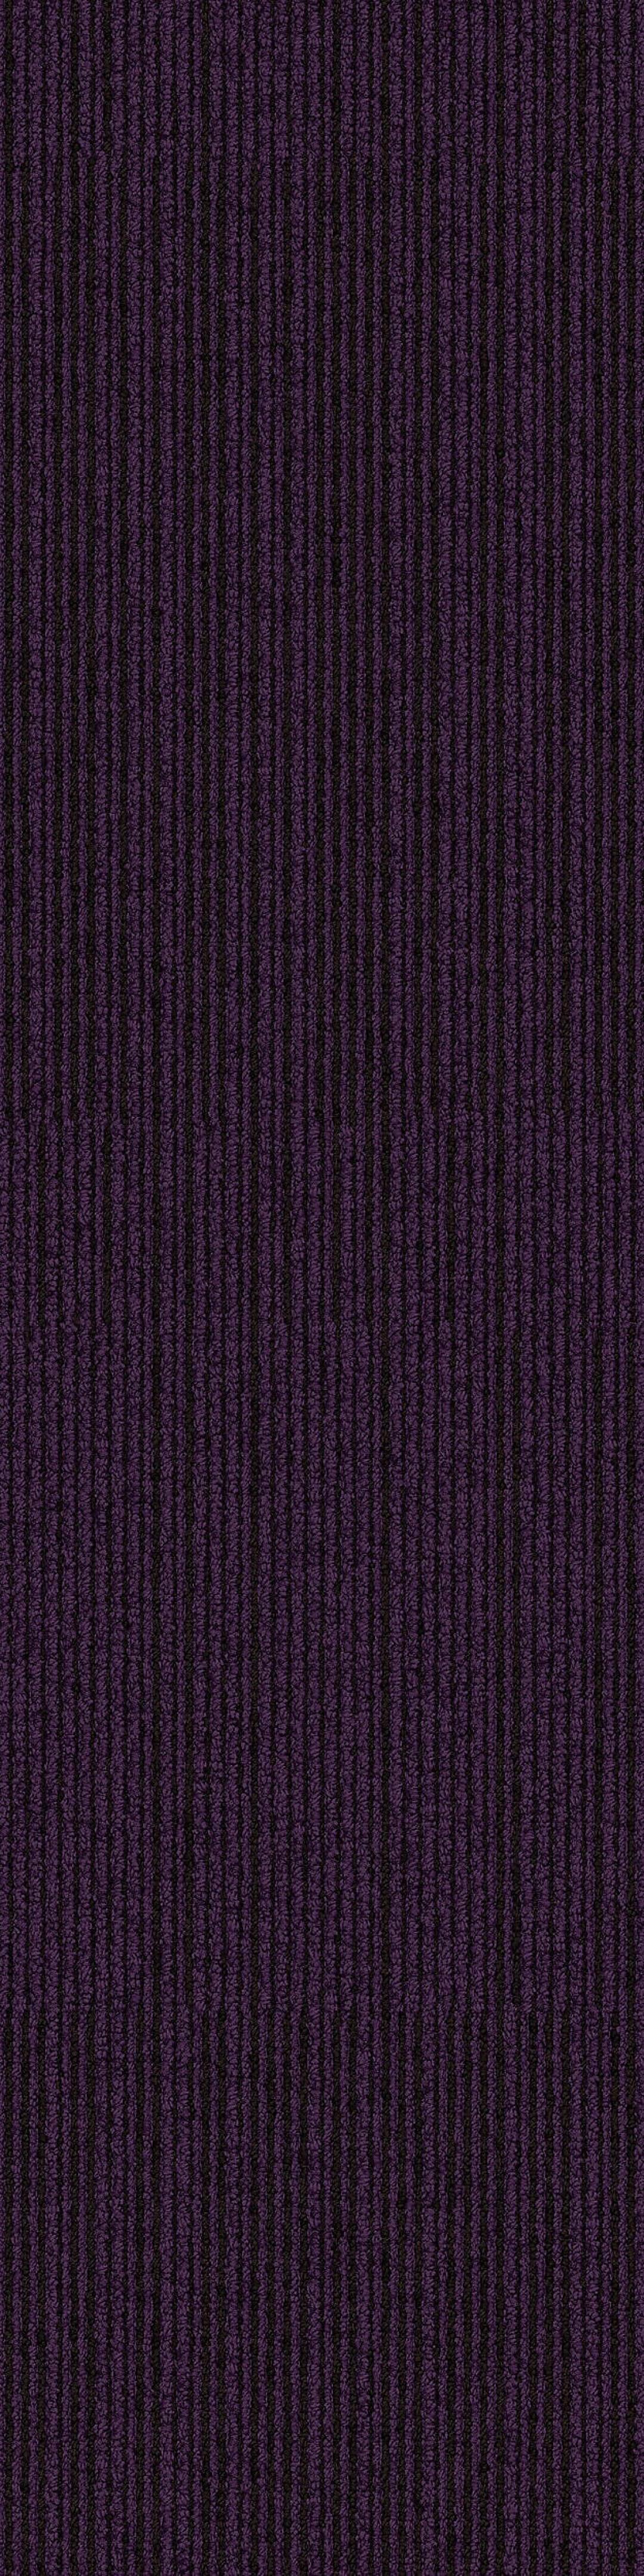 On Line - Purple from Inzide